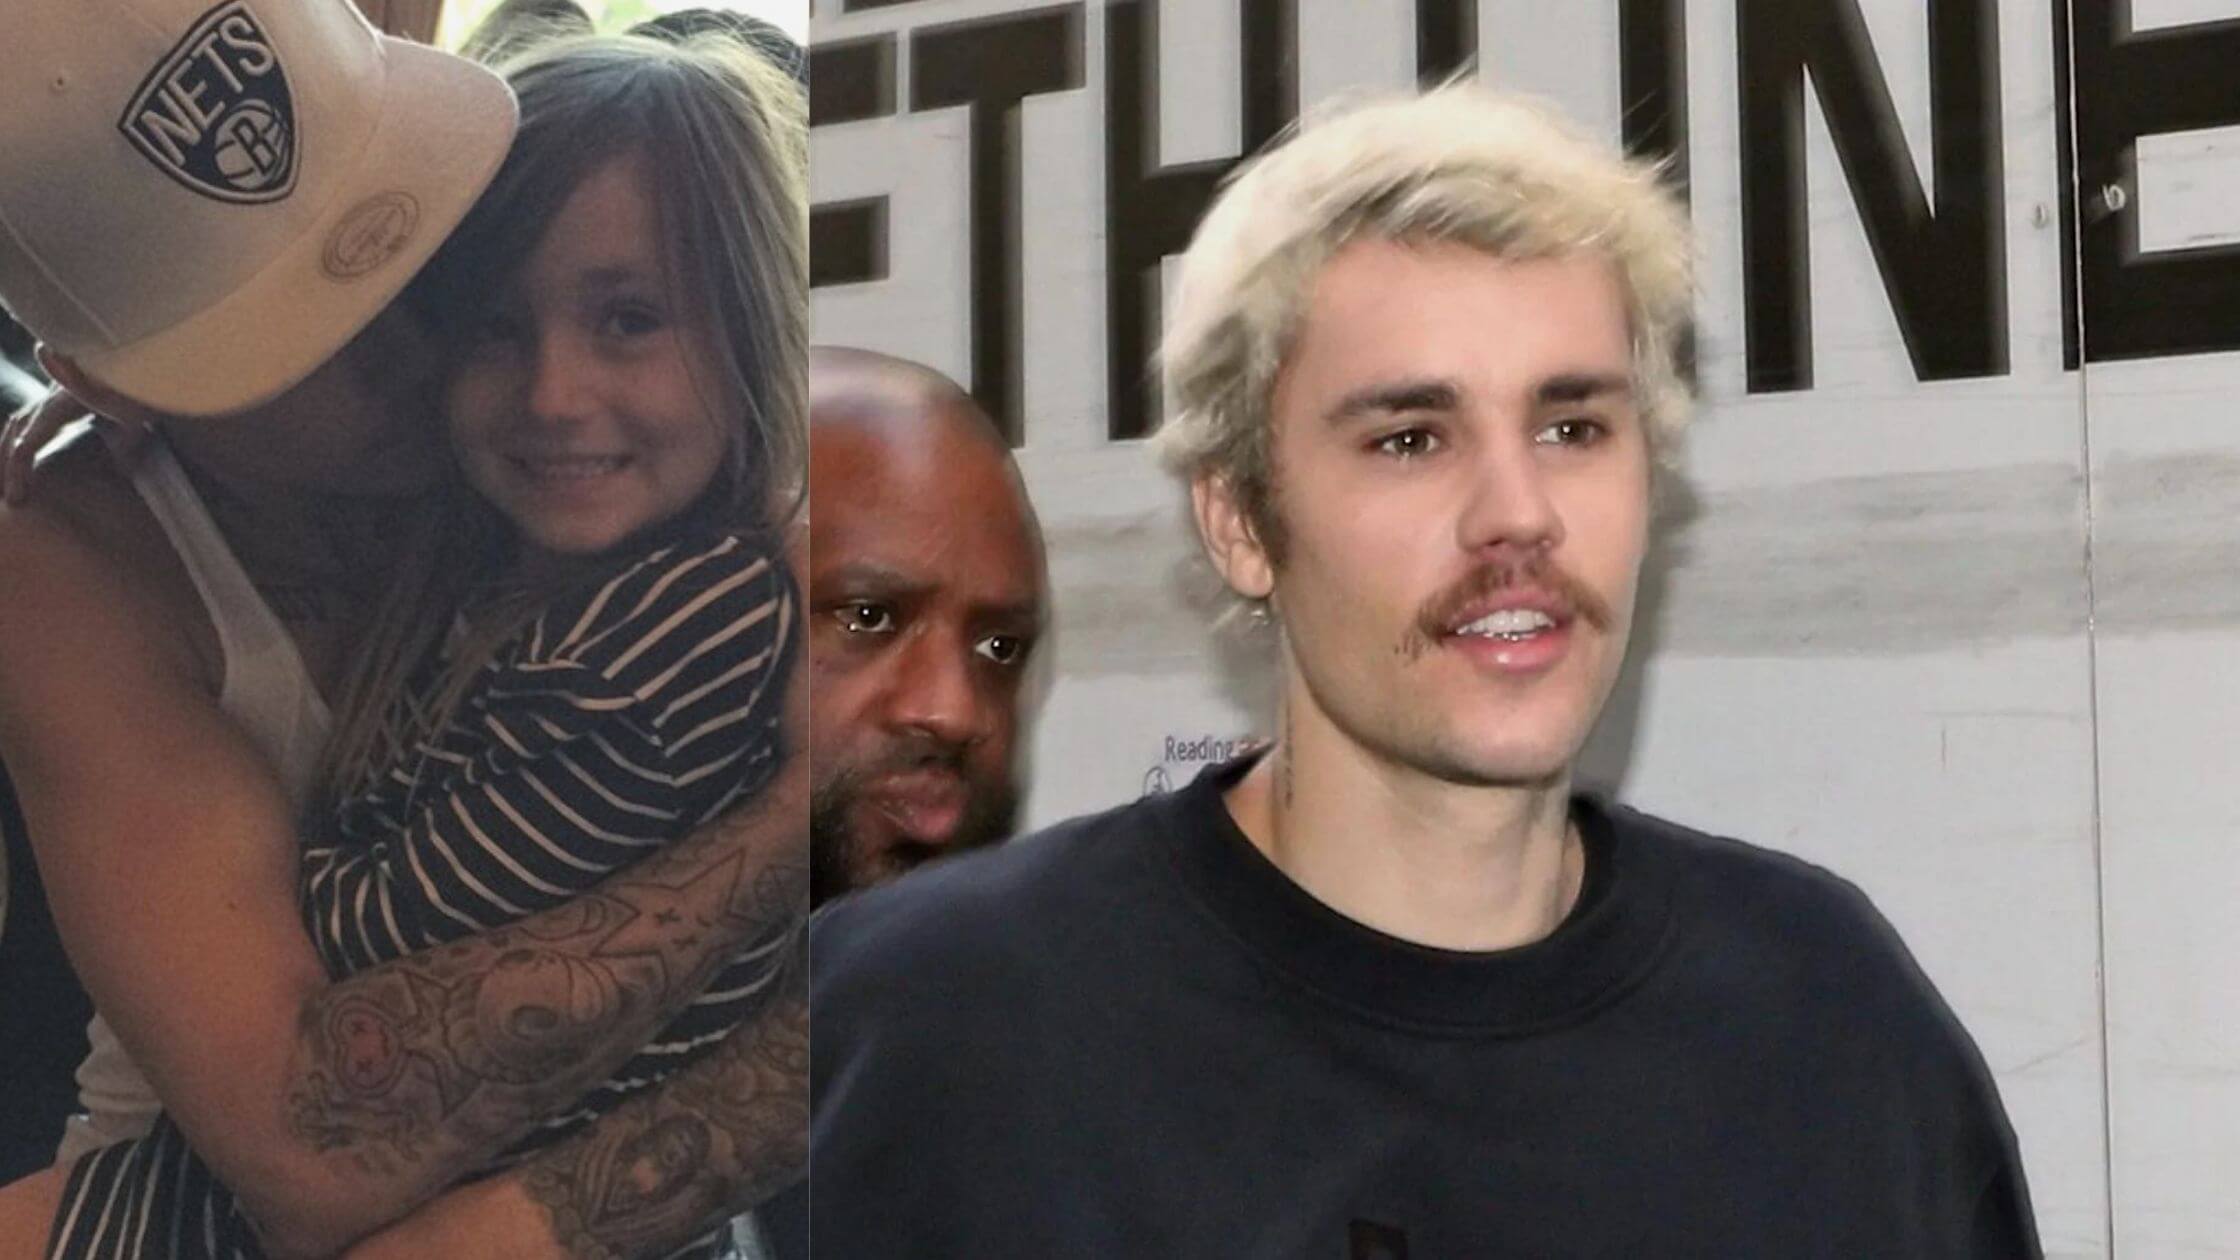 Justin Bieber Writes A Sweet Tribute To Little Sister Jazmyn On The 14th Birthday